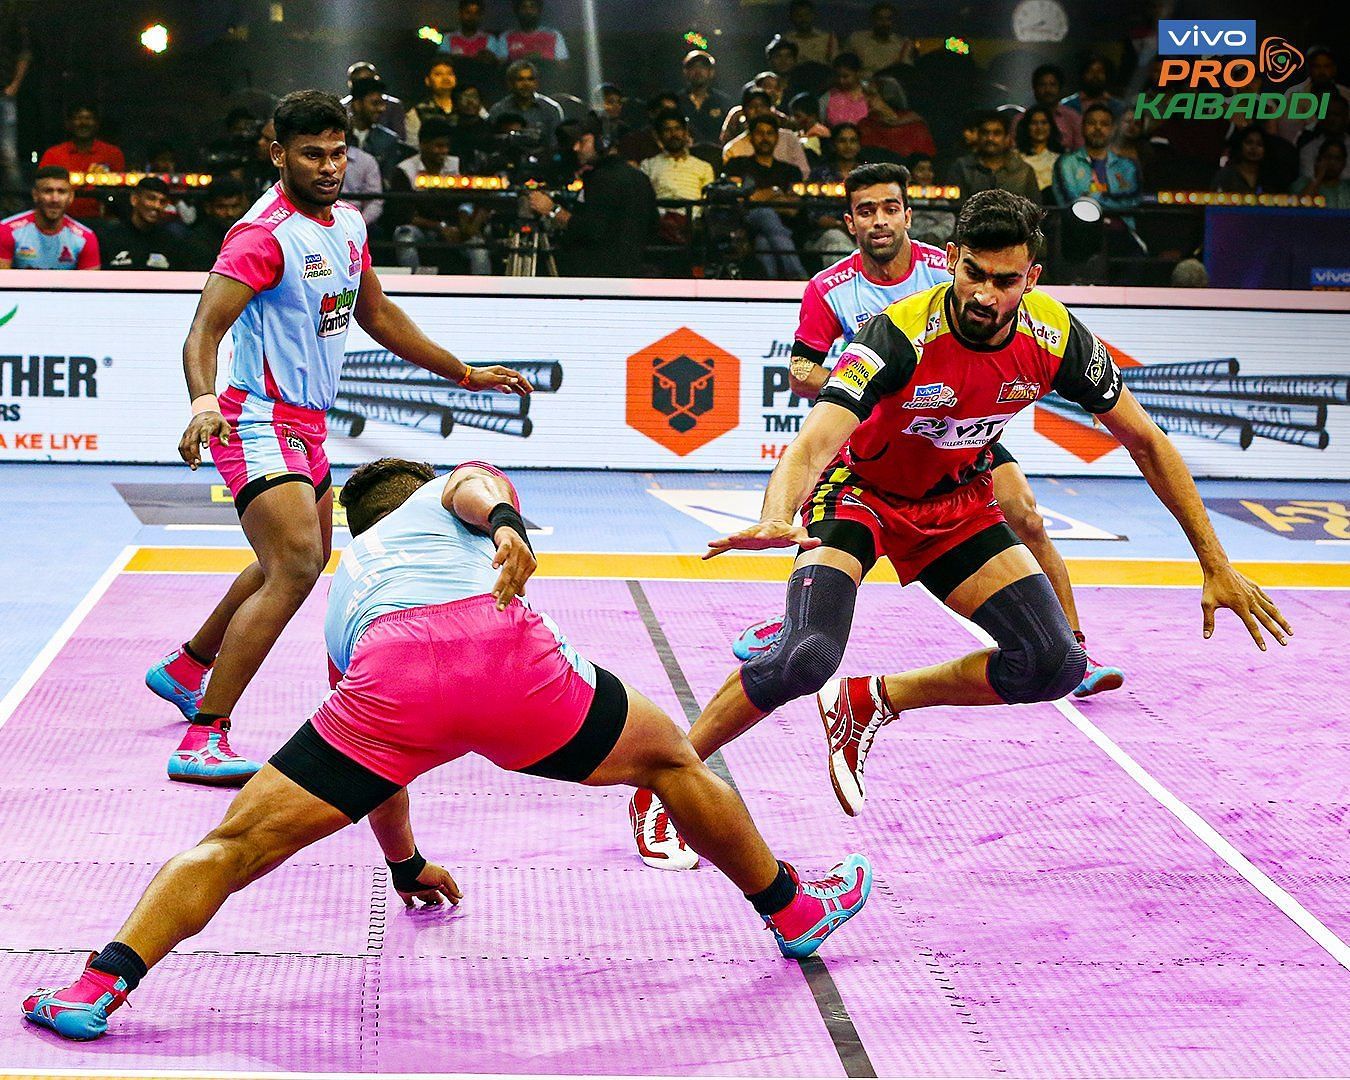 Bengaluru Bulls are unlikely to finish in the Top 2 (Image: PKL/Twitter)